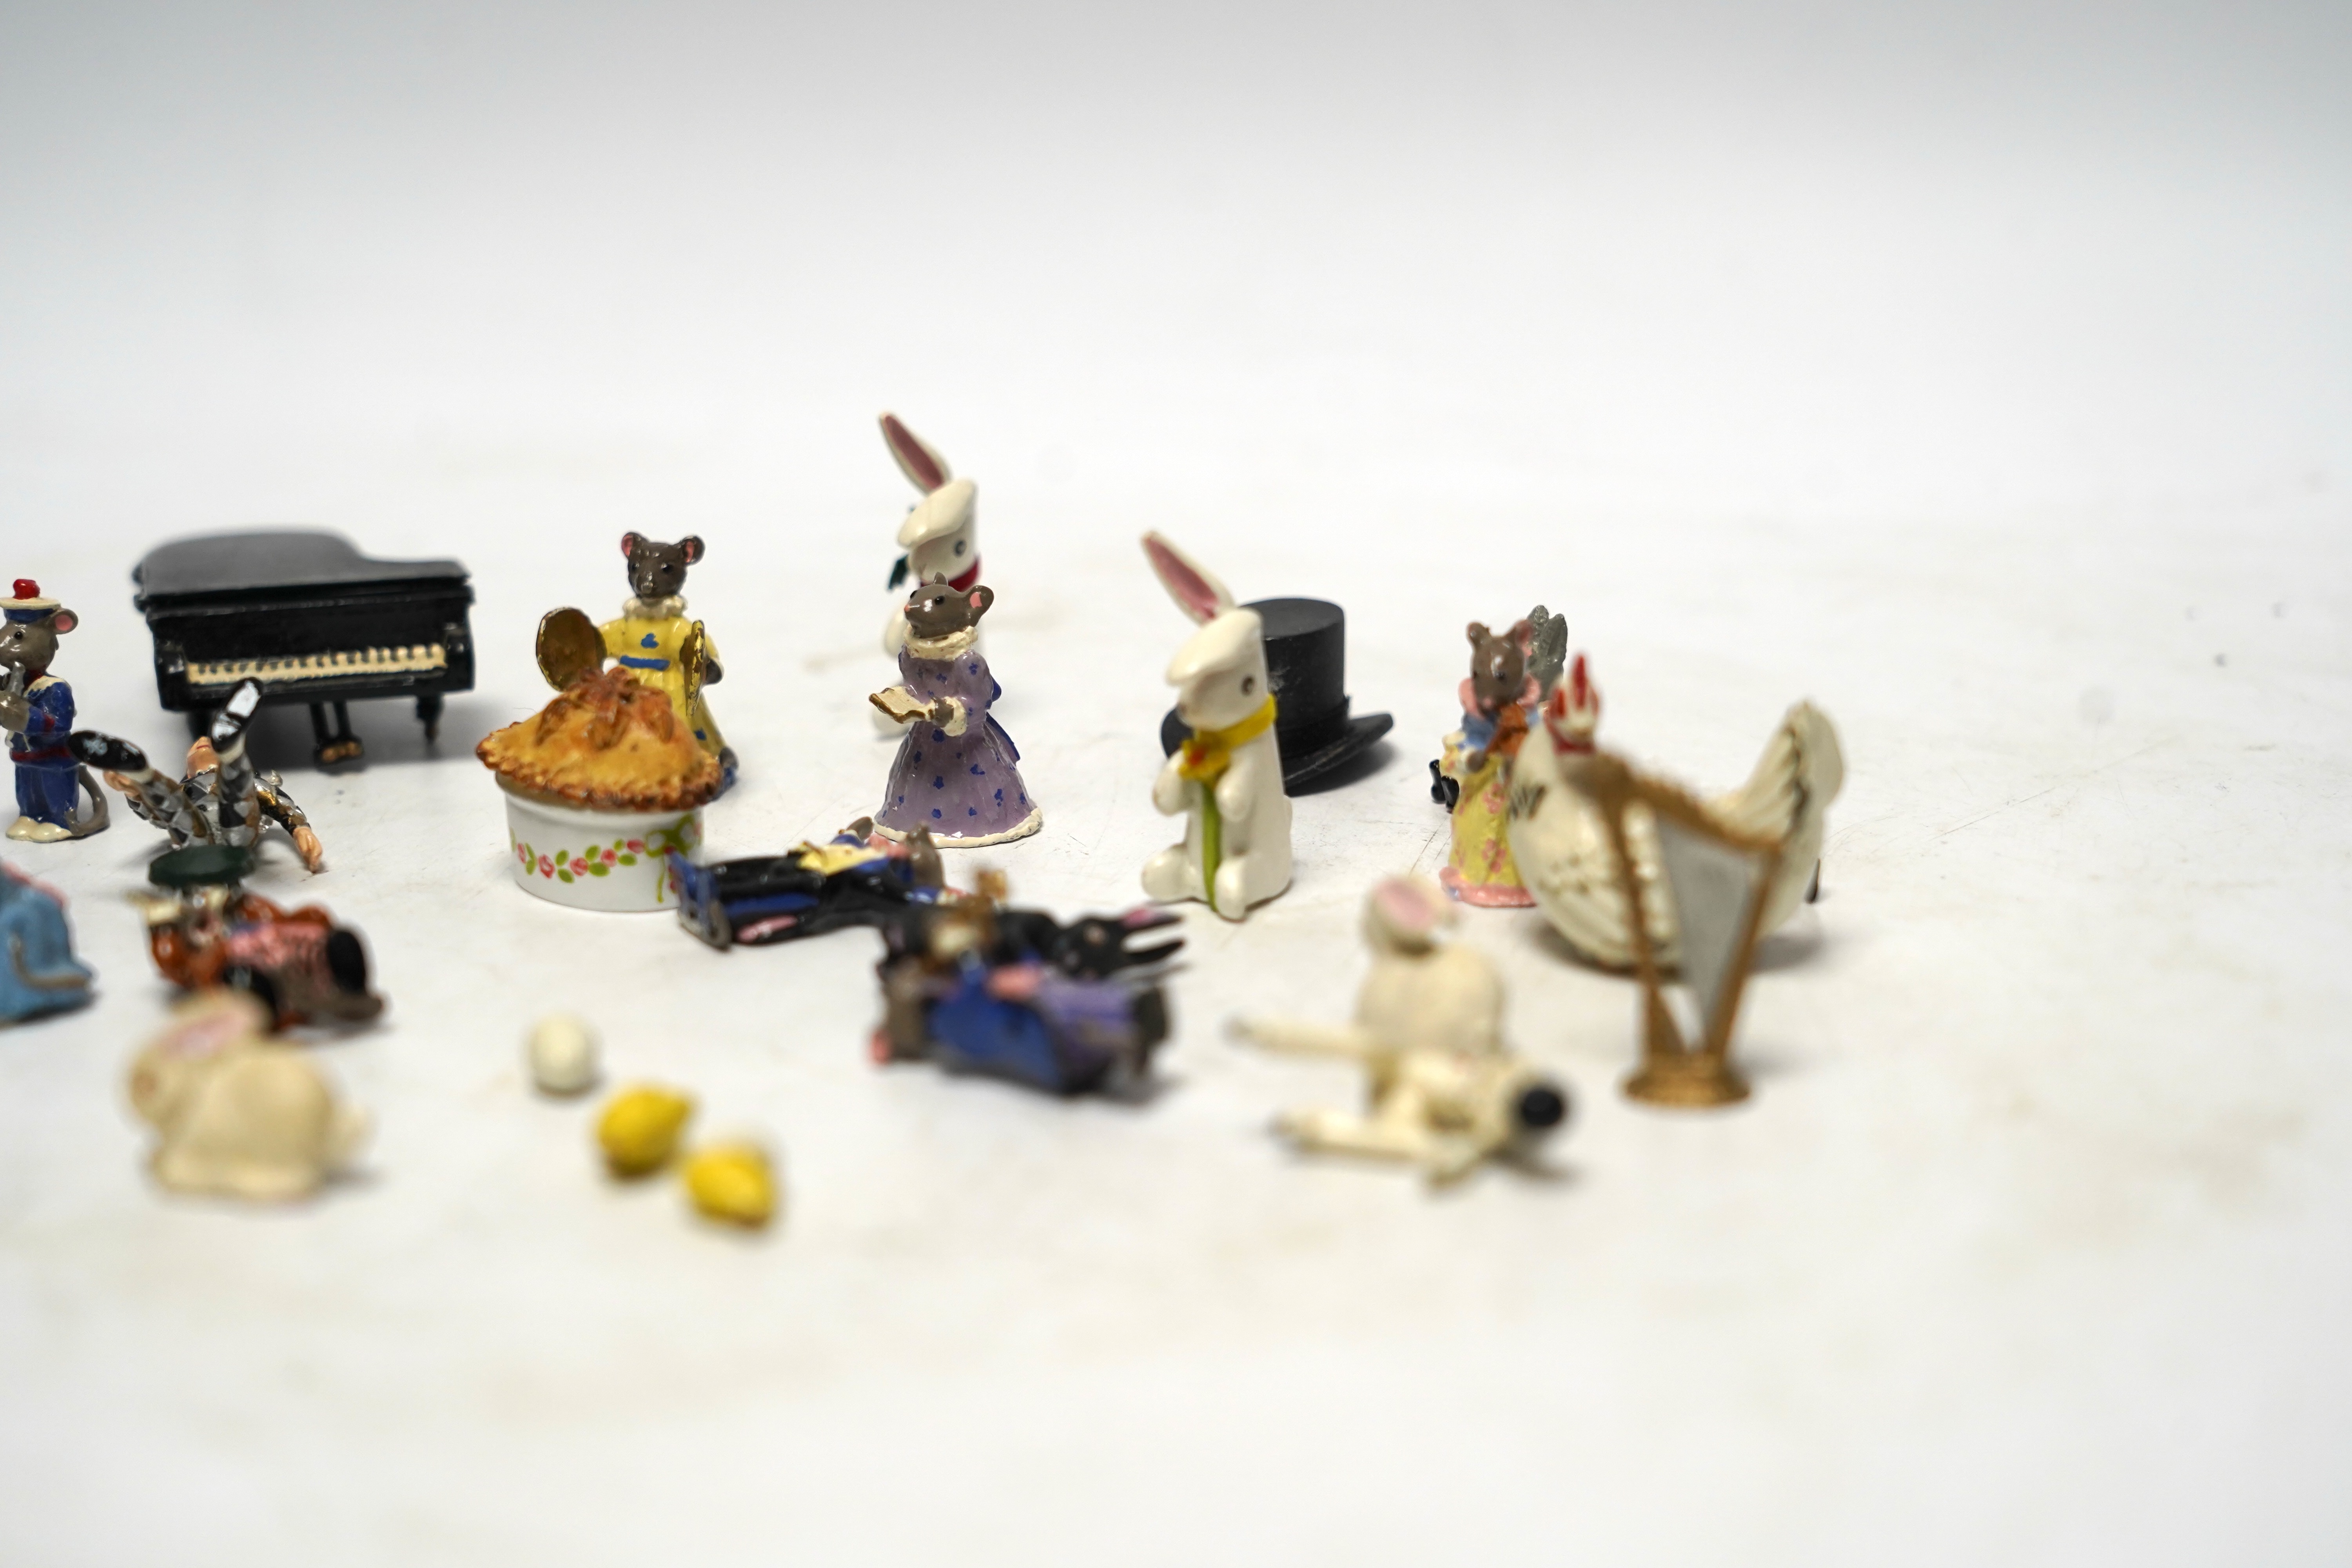 Miniature novelty diecast figures including mouse orchestra, grand piano and other figures, largest 4.5cm wide